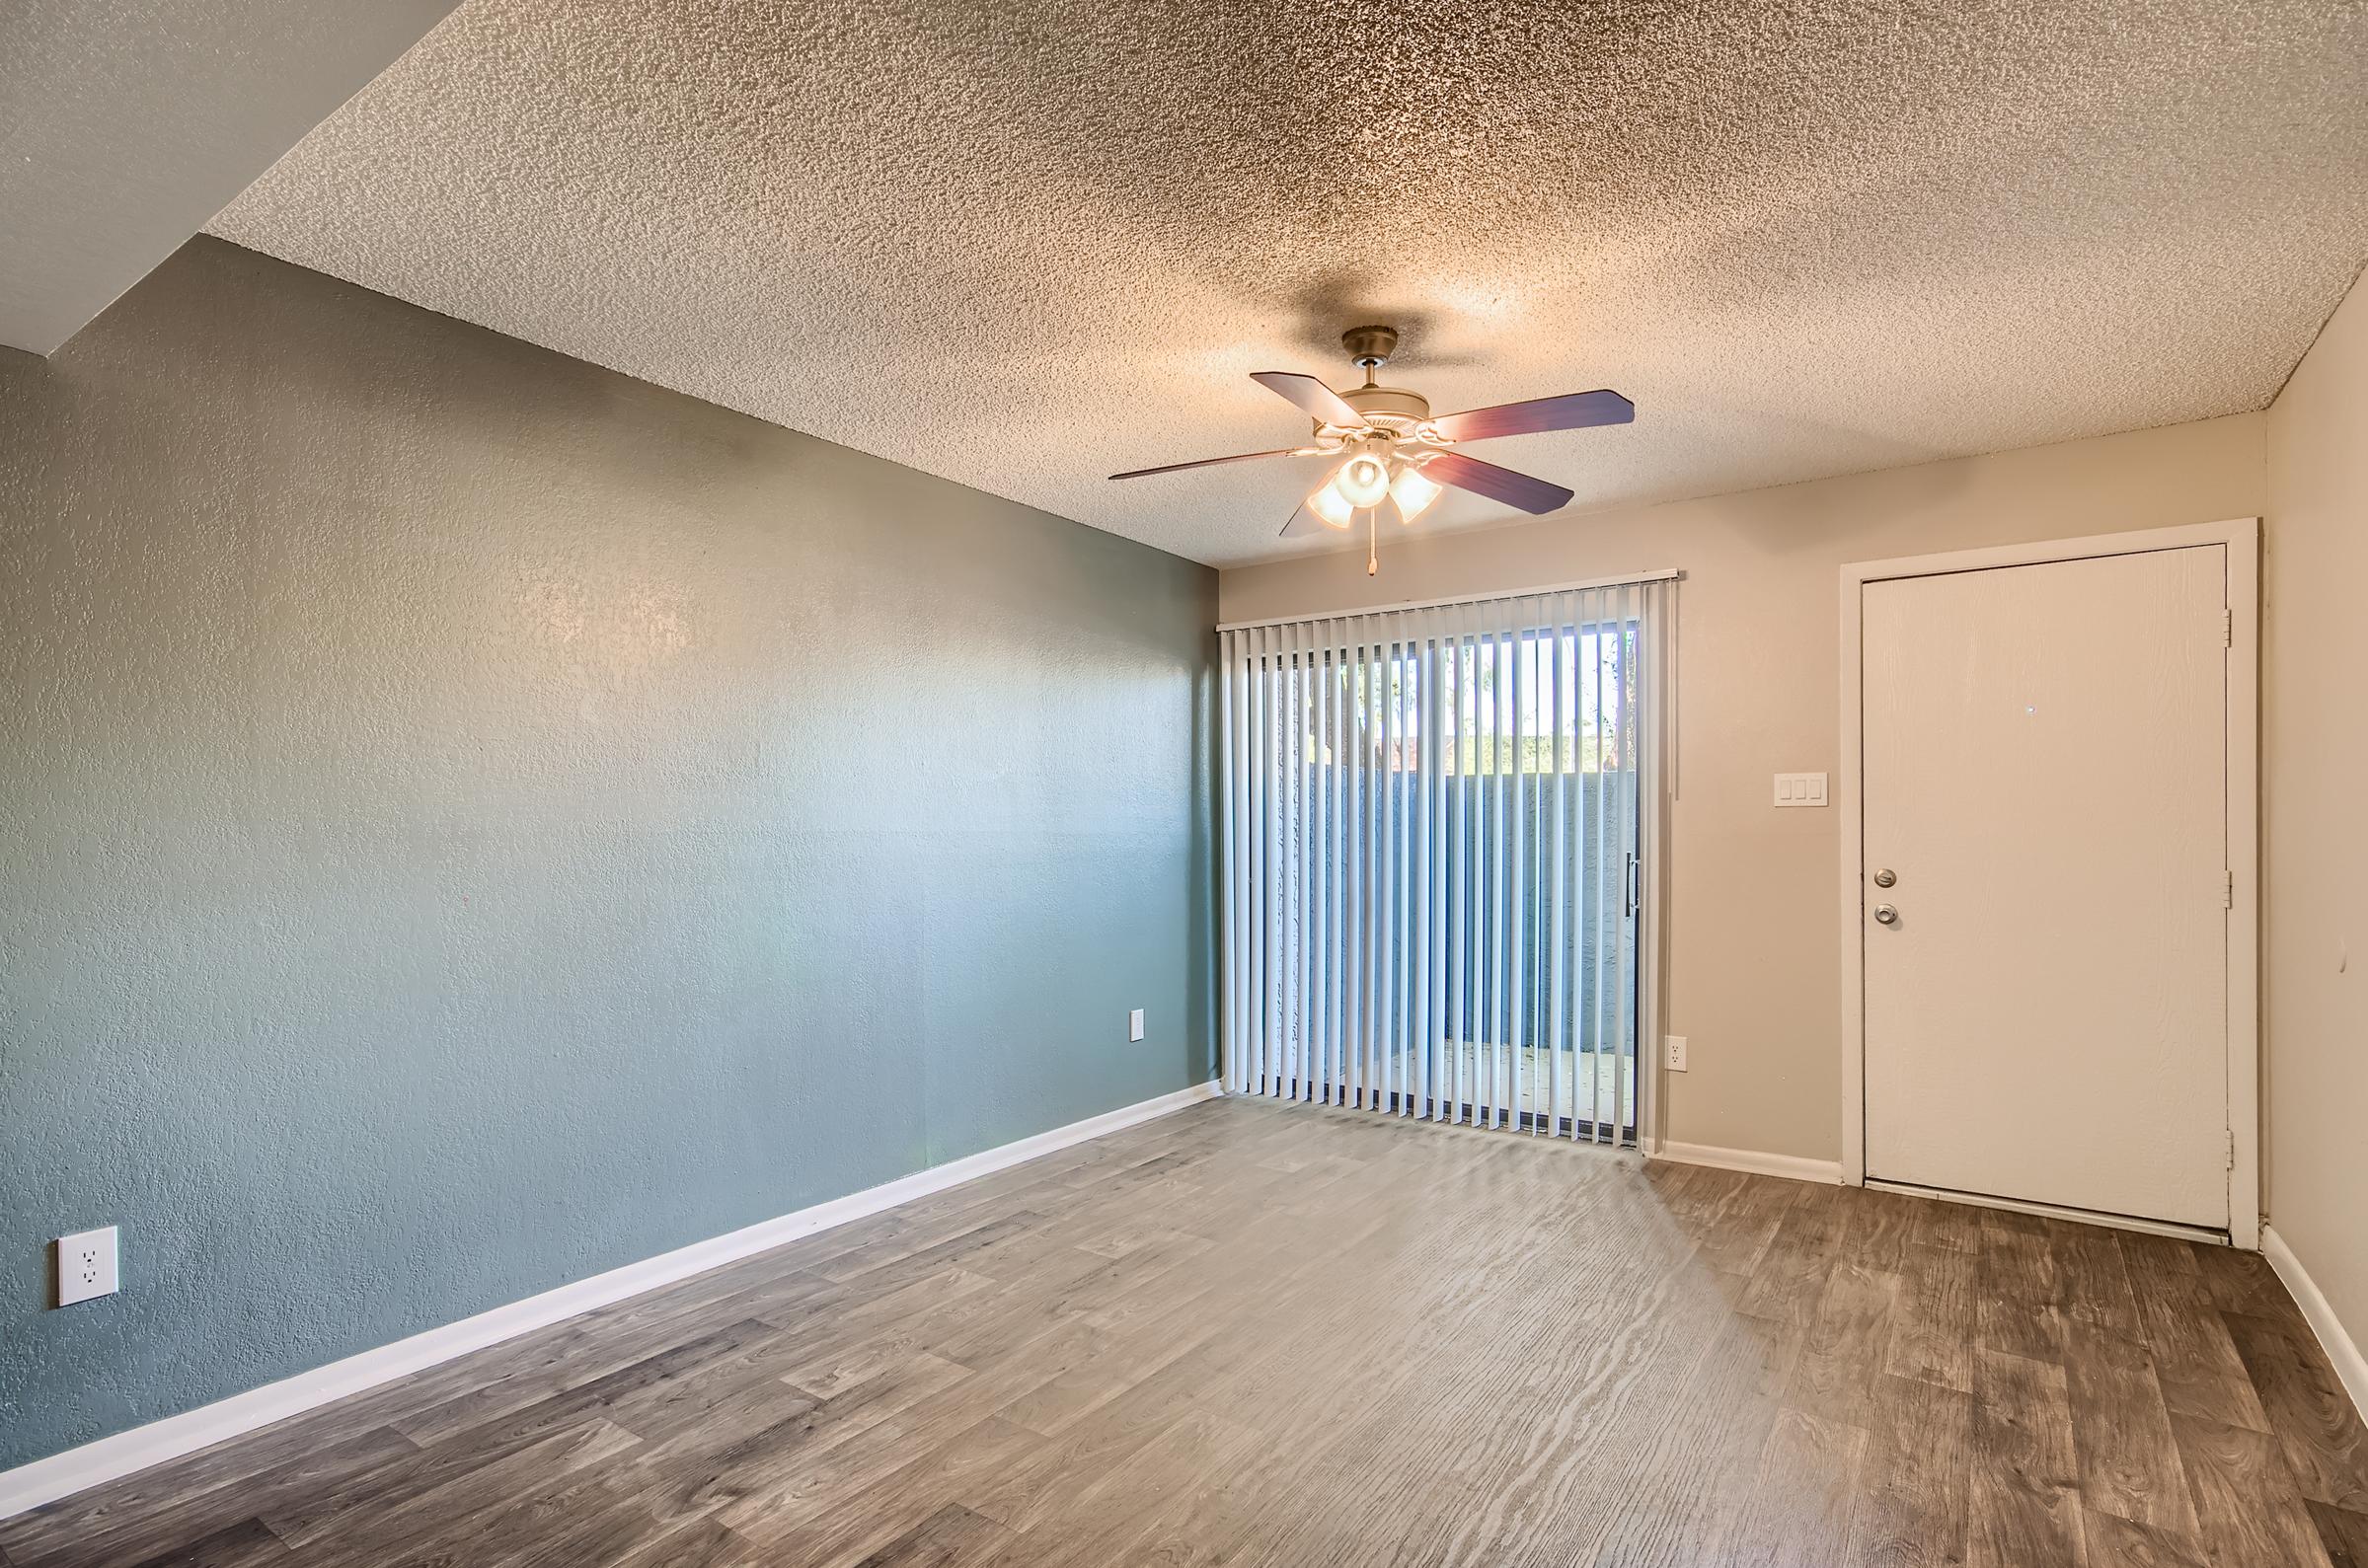 A first floor apartment living room at Rise on McClintock with sliding doors to the balcony.